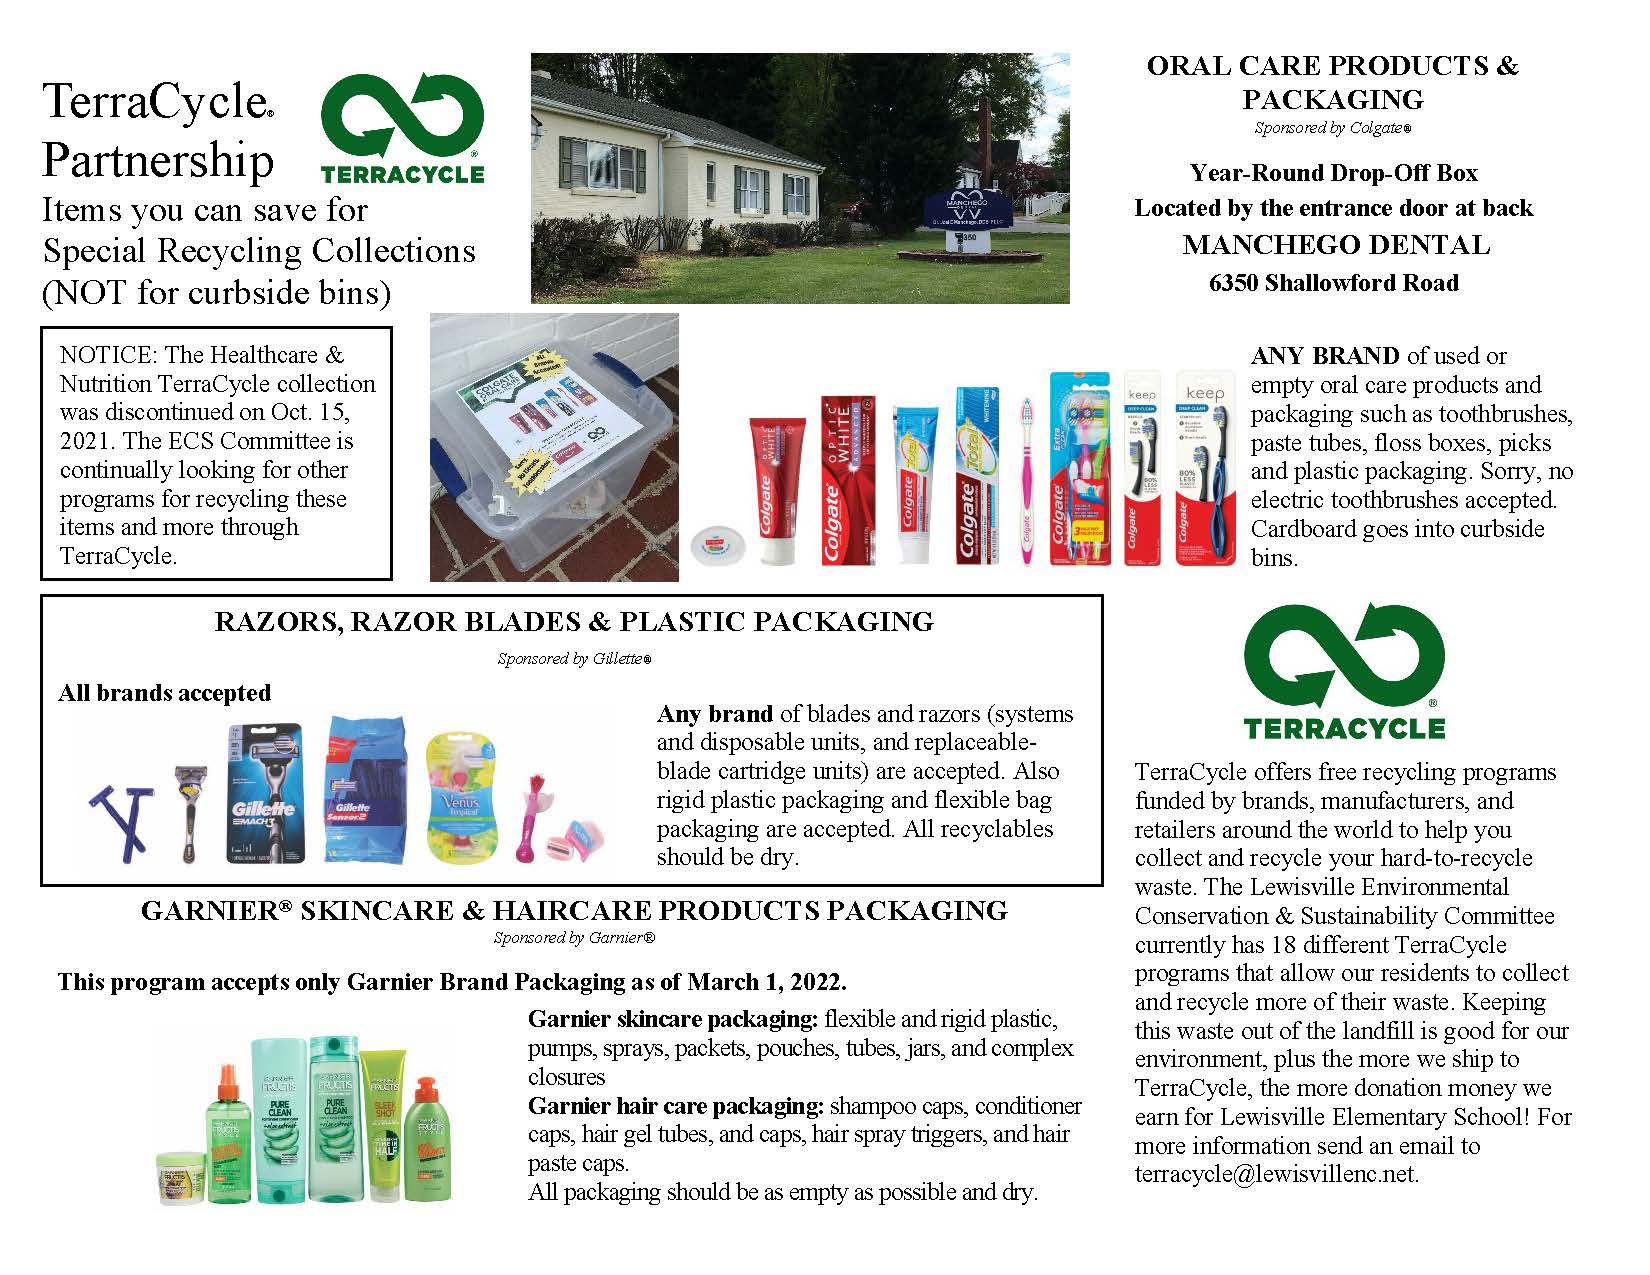 terracycle-sites-3-pages-3